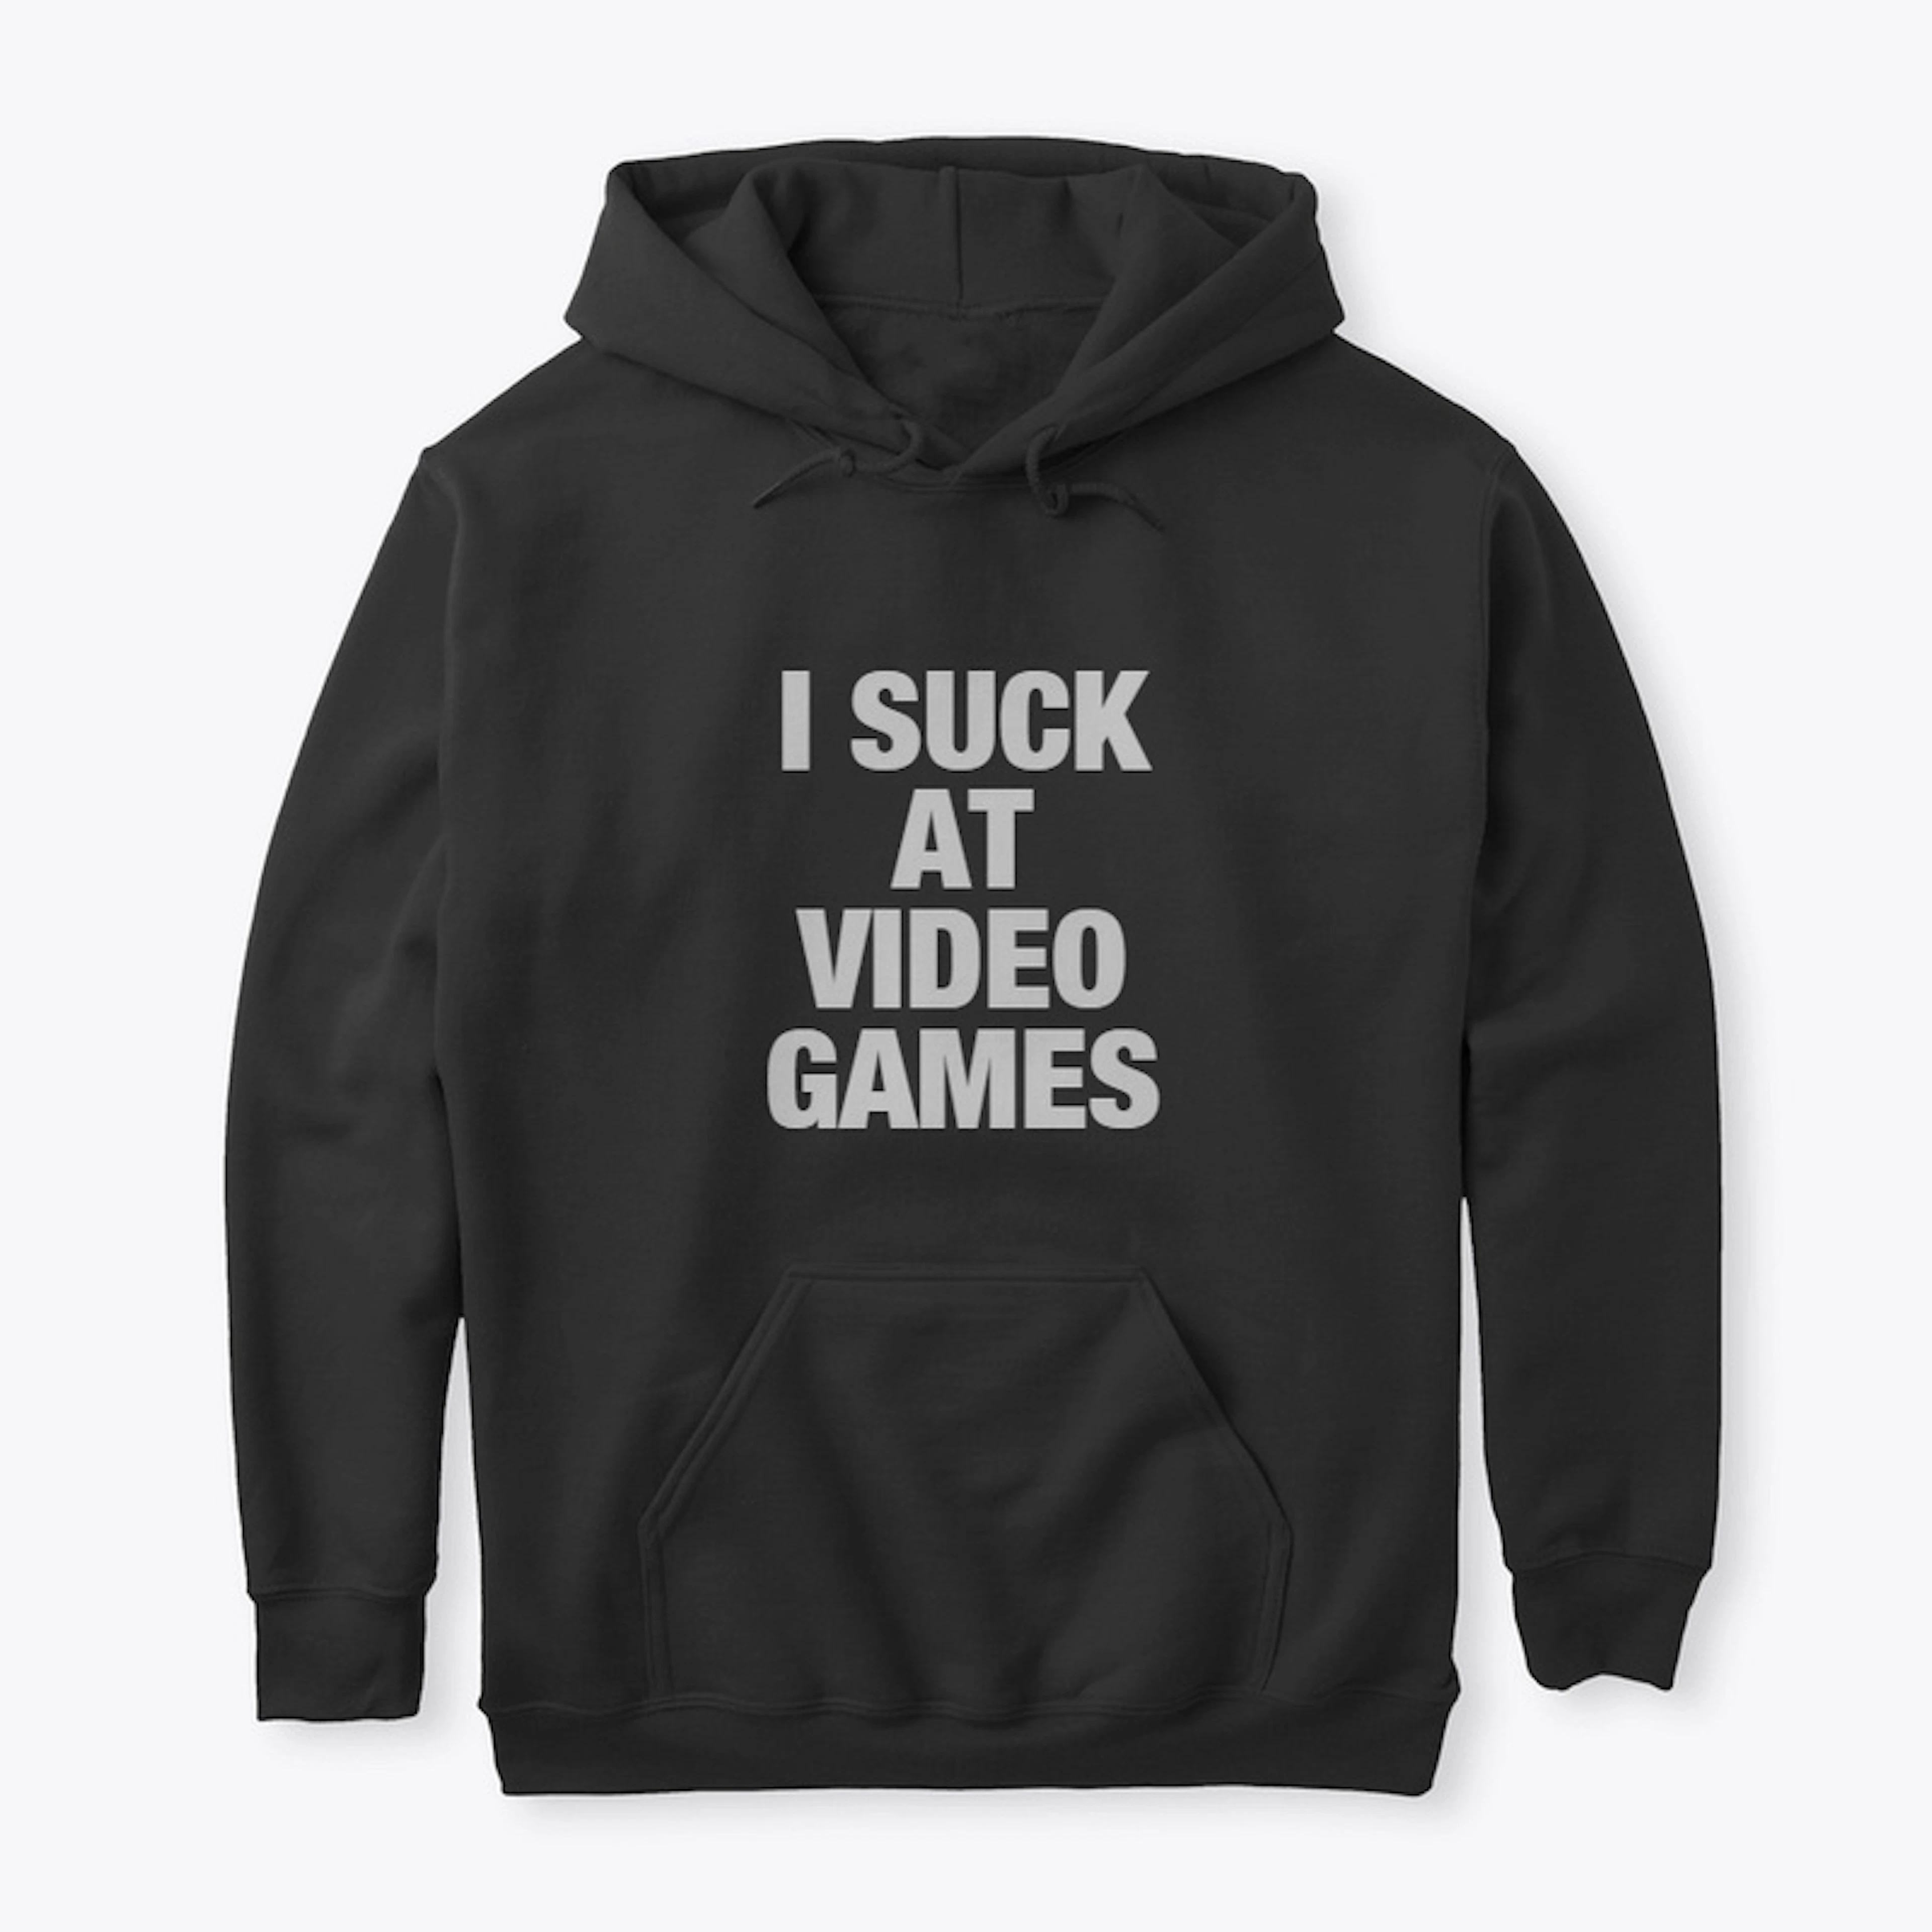 I SUCK AT VIDEO GAMES!